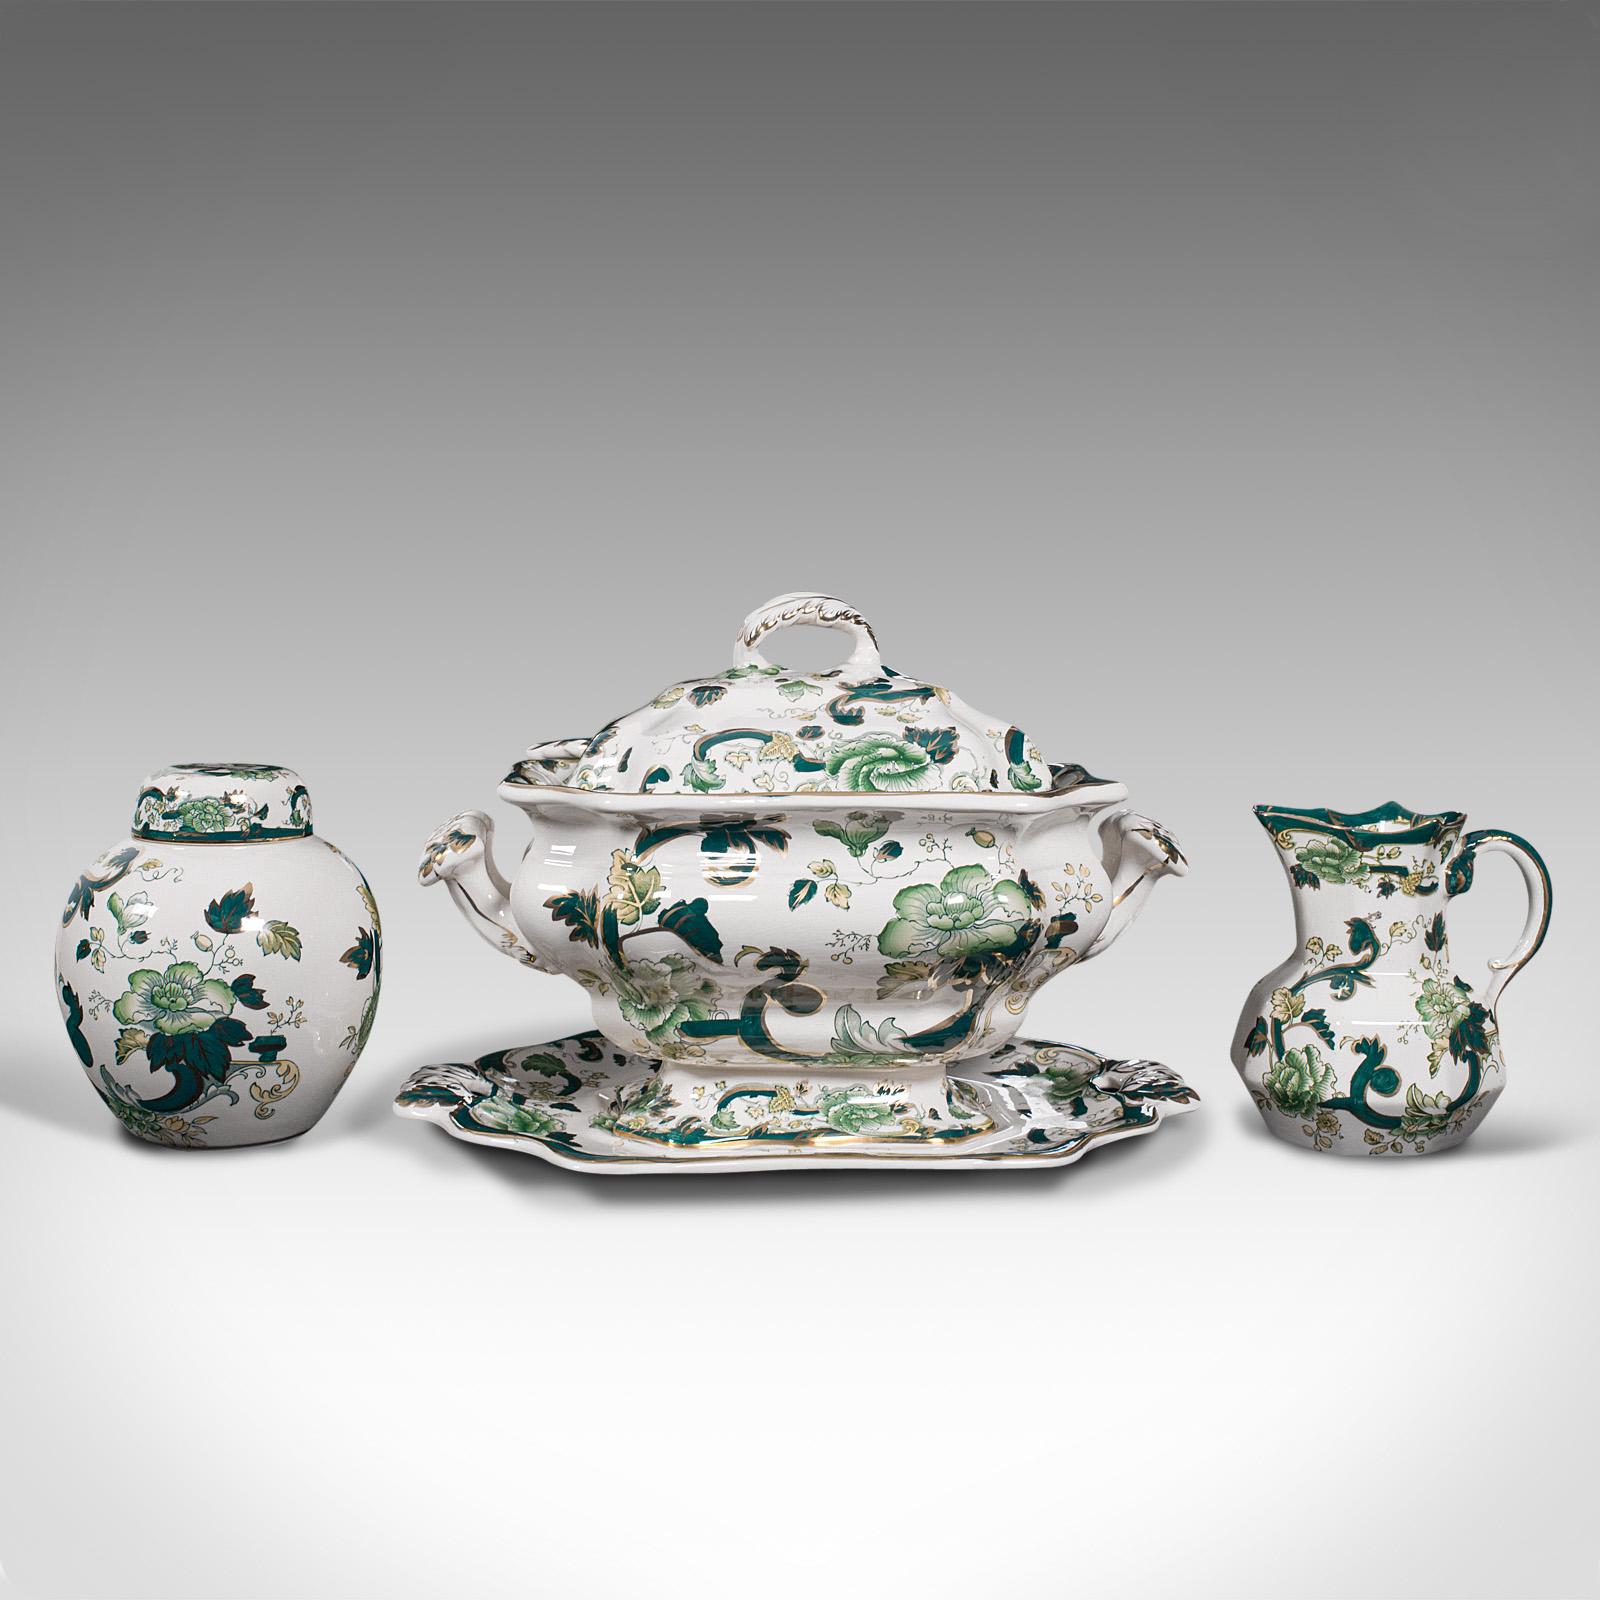 This is an antique dinner service set. An English, ceramic tureen on tray with pot and jug by Mason, dating to the early 20th century, circa 1920.

Comprehensive five piece set with wonderful colour and detail
Attractive and striking, this